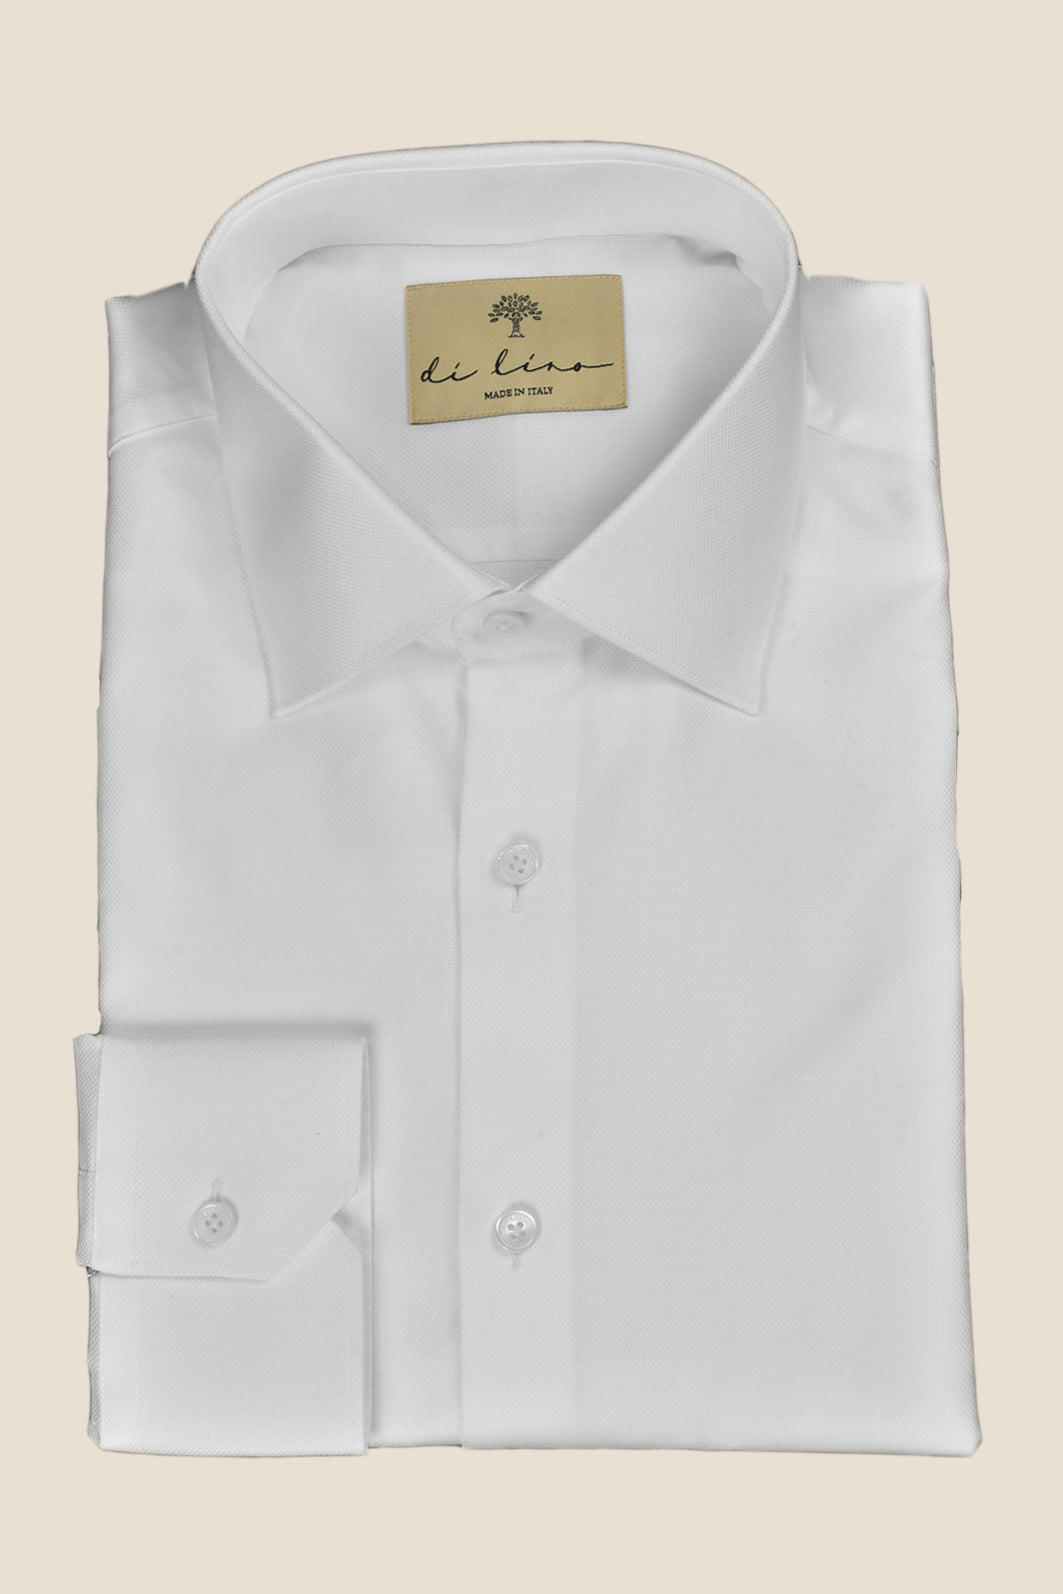 White, slightly structured business shirt made of organic cotton with a classic shark collar - Made to order